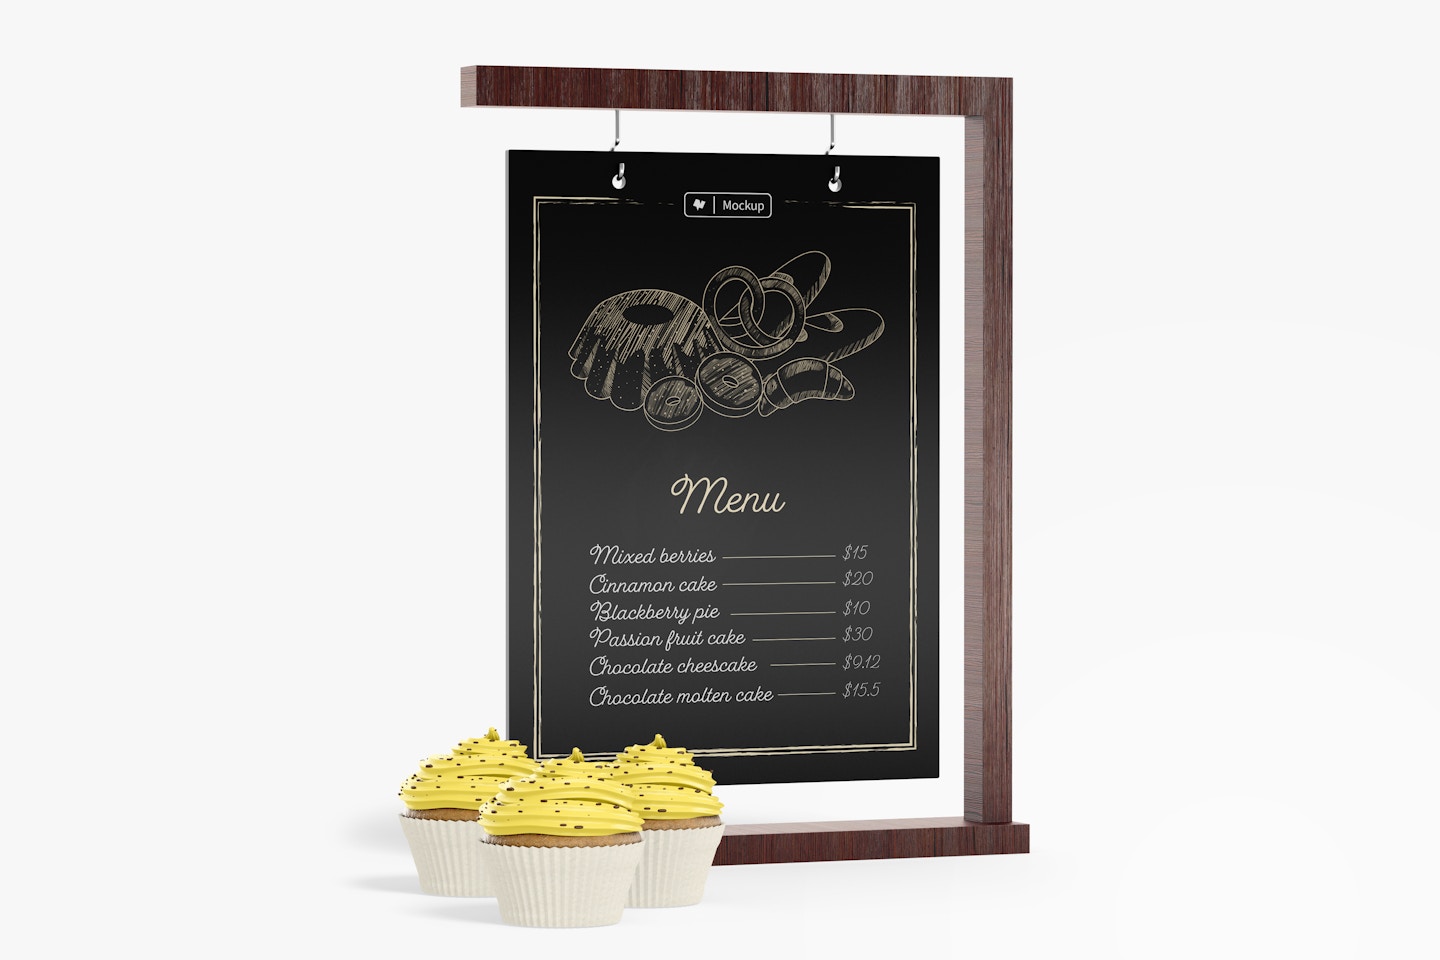 Tabletop Hanging Sign with Cupcakes Mockup